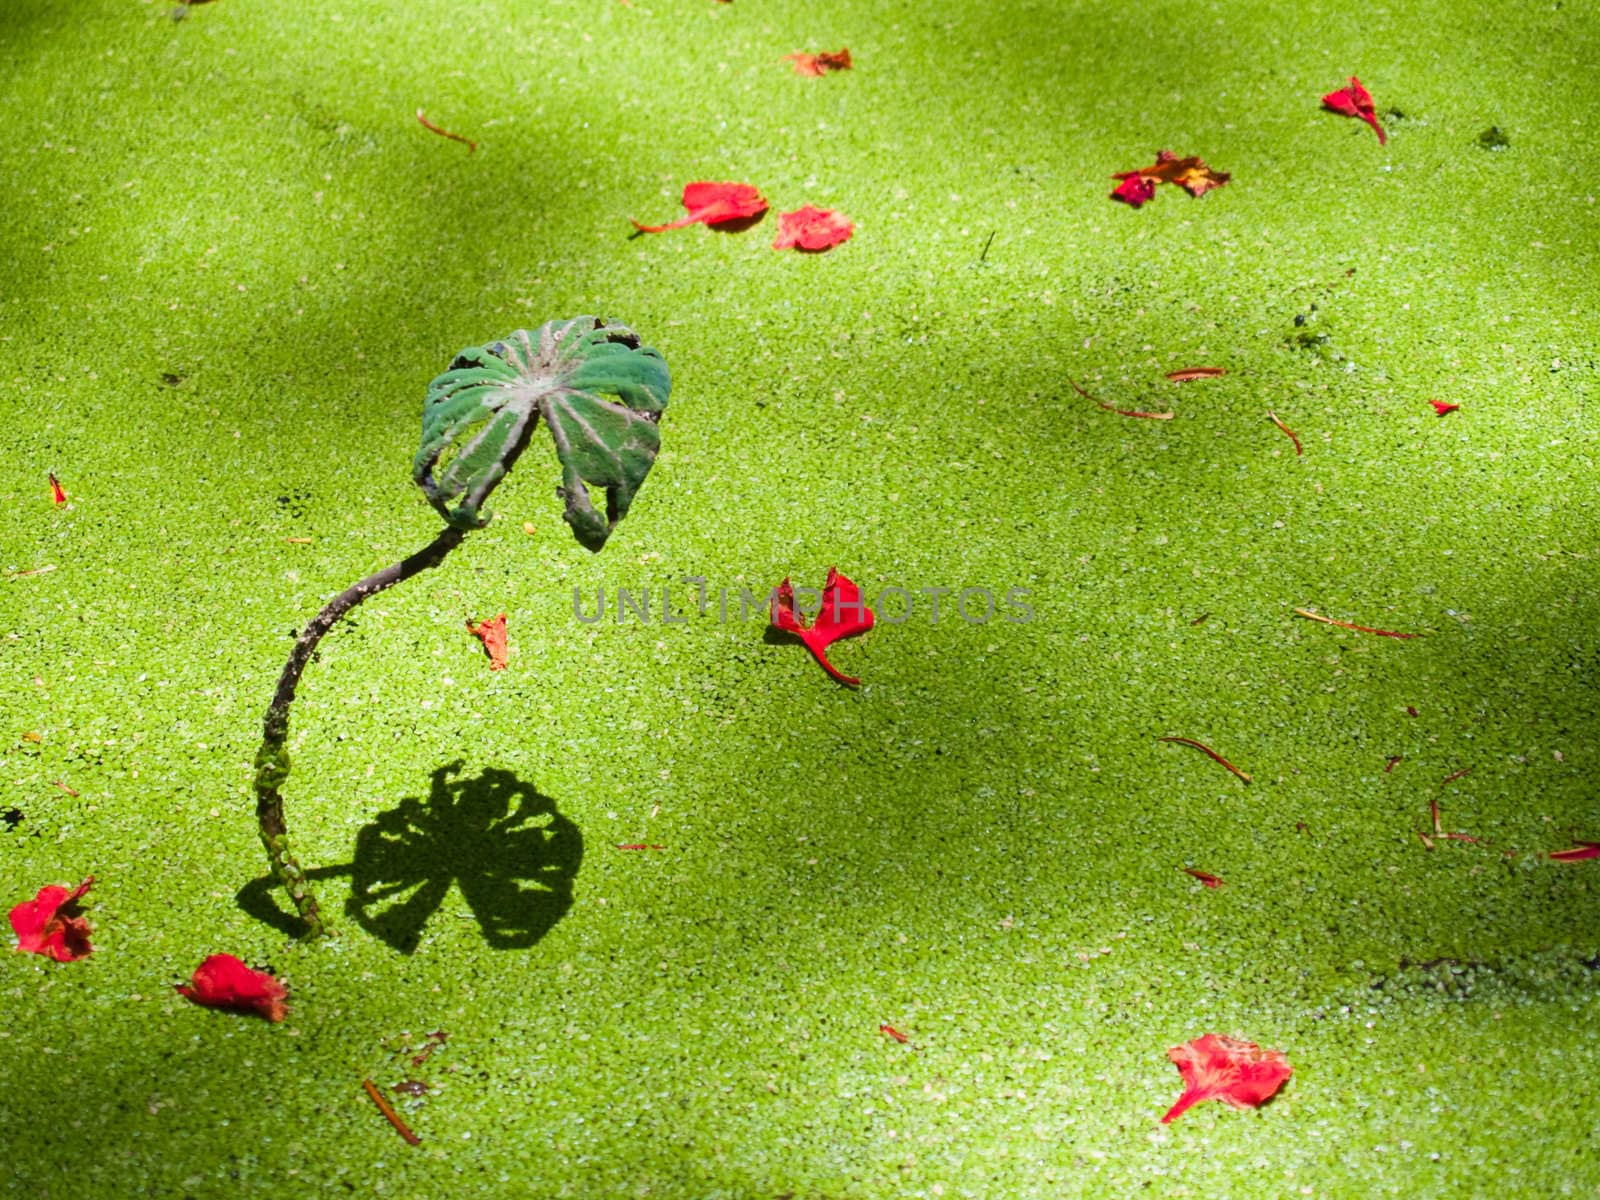 Reflection of alone lotus leaf on green duckweed